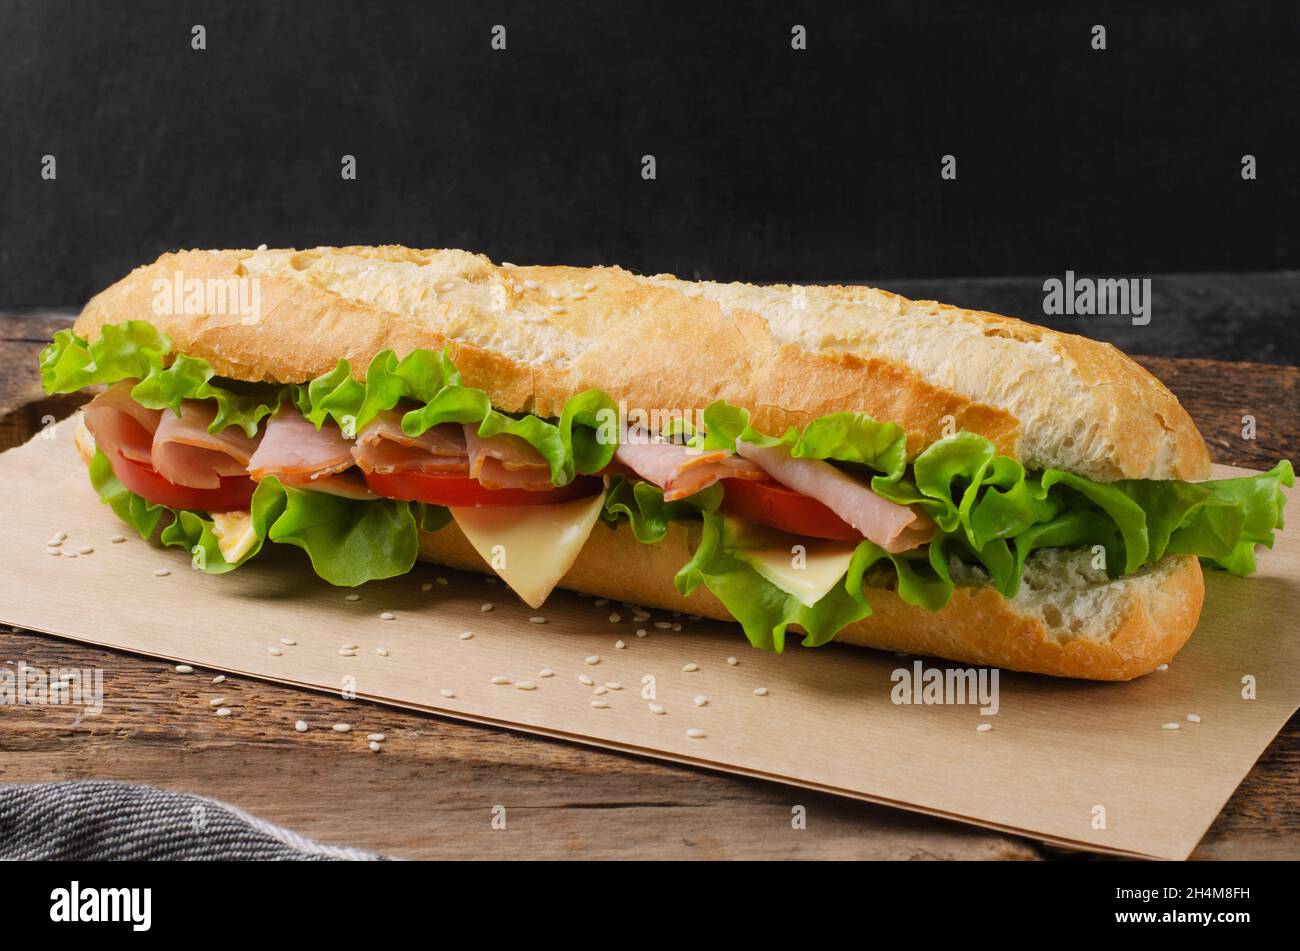 Sandwich with ham, tomato and cheese on a wooden background Stock Photo